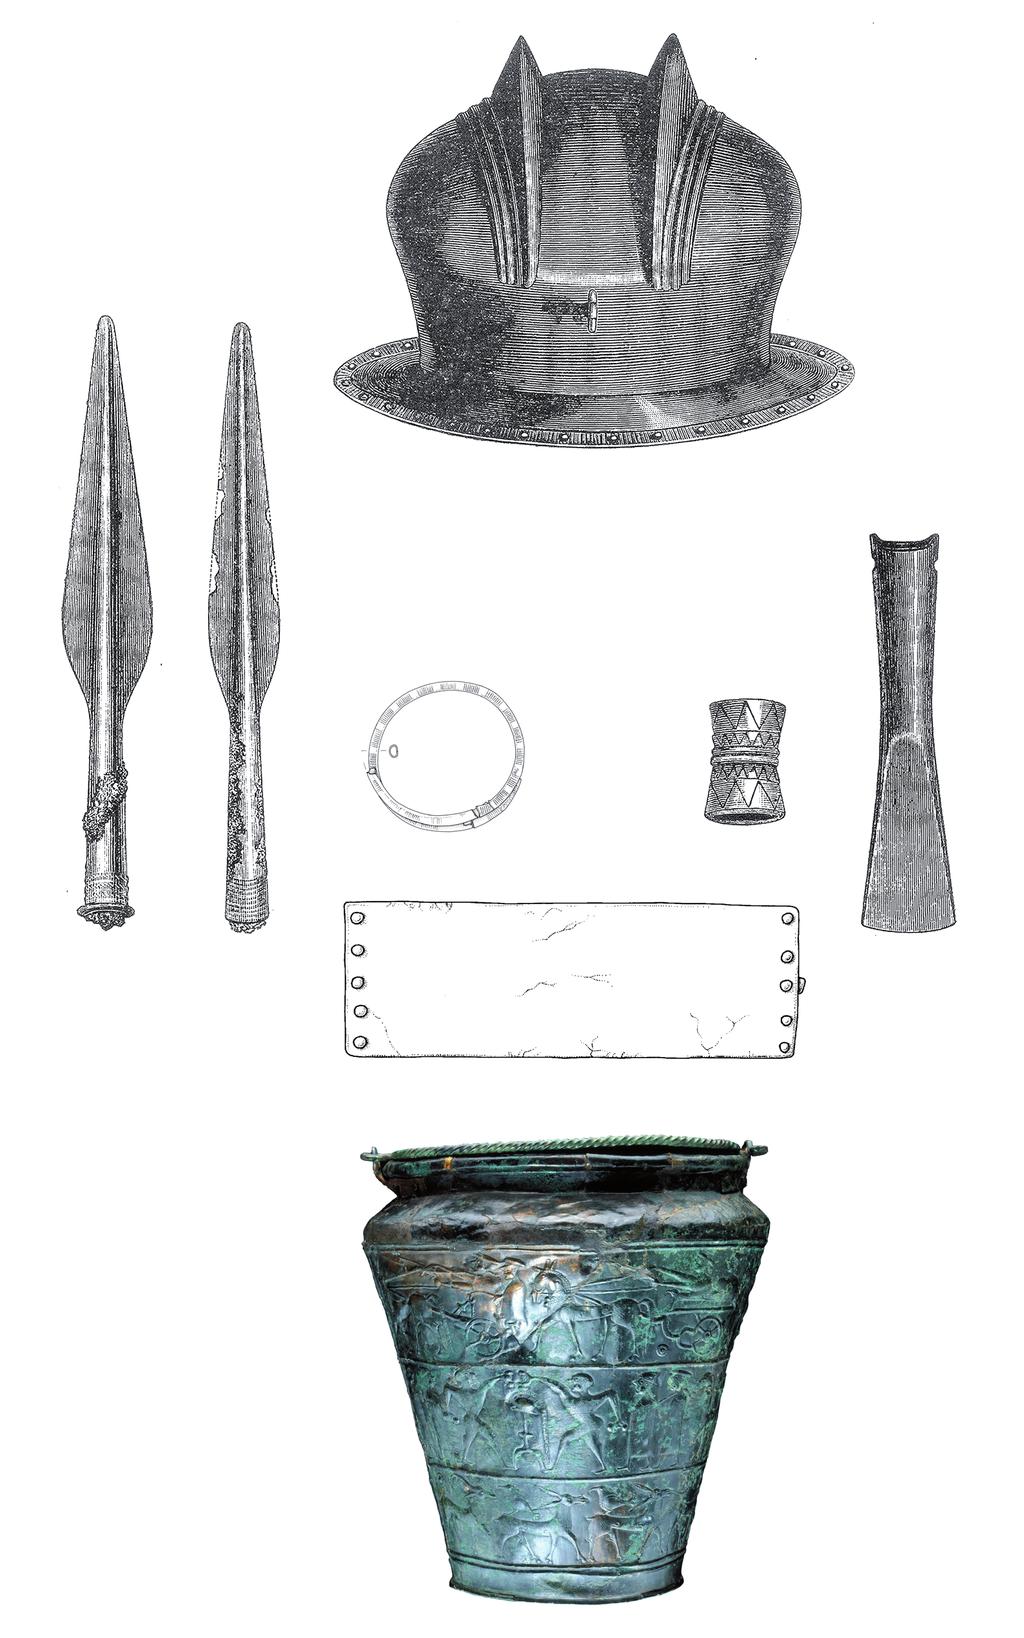 Fig. 7: Finds from the grave with the Vače Situla.